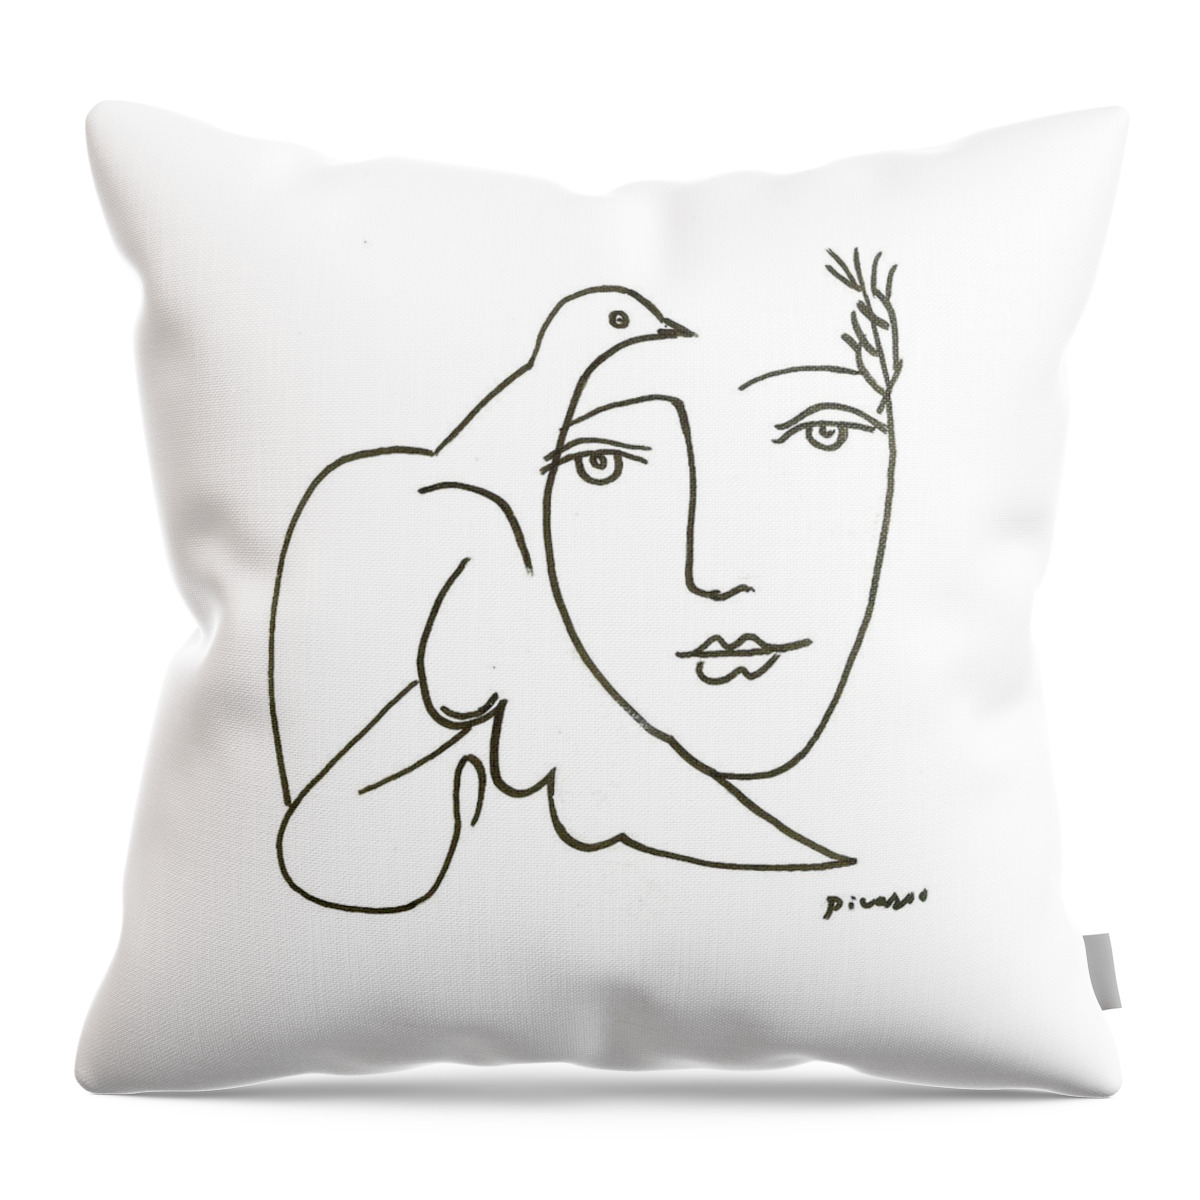 Dove Throw Pillow featuring the drawing The Fearless One by Picasso